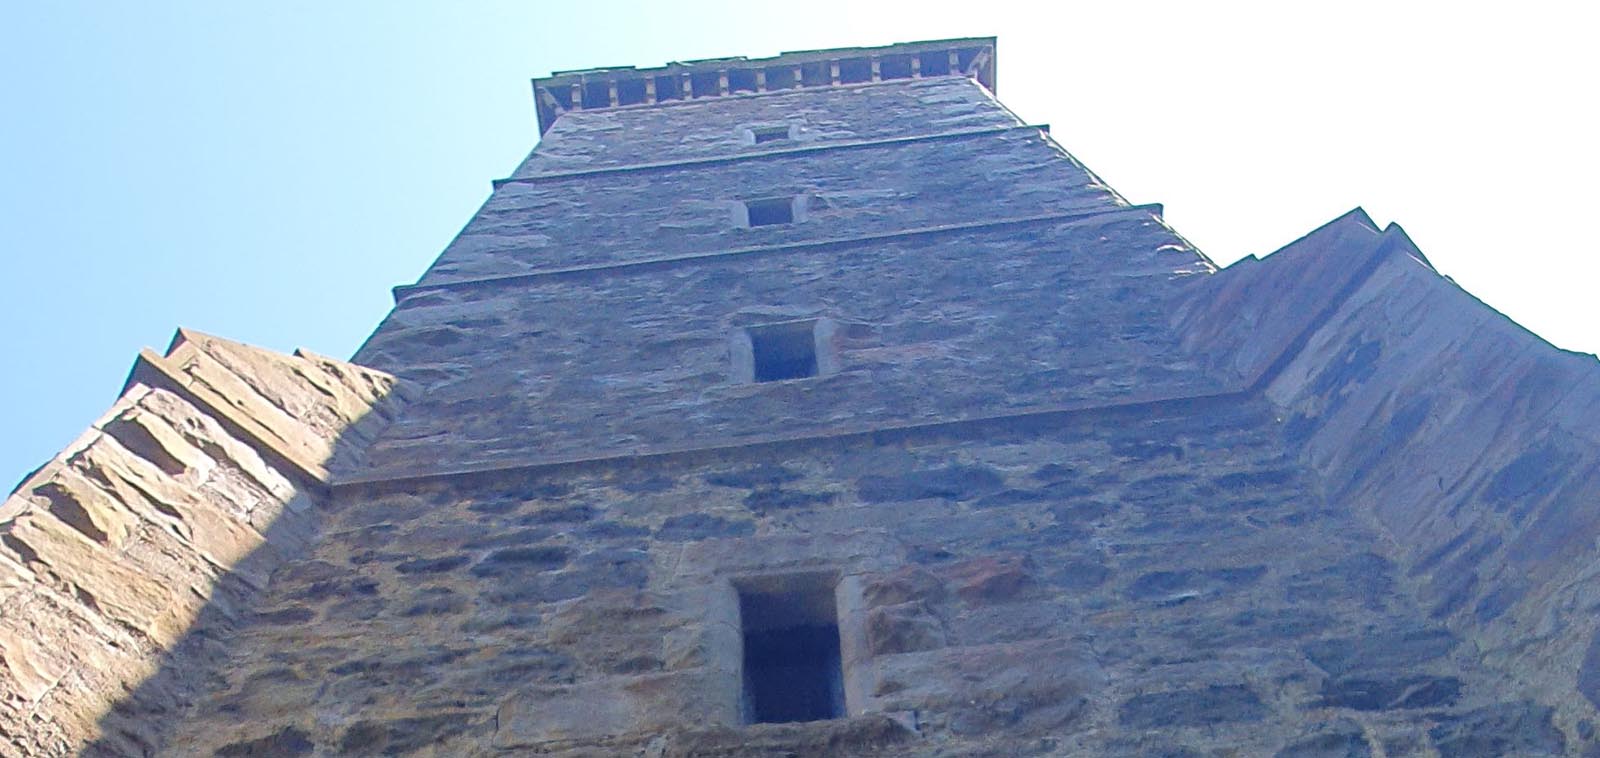 Corstorphine Hill Tower from the ground looking up